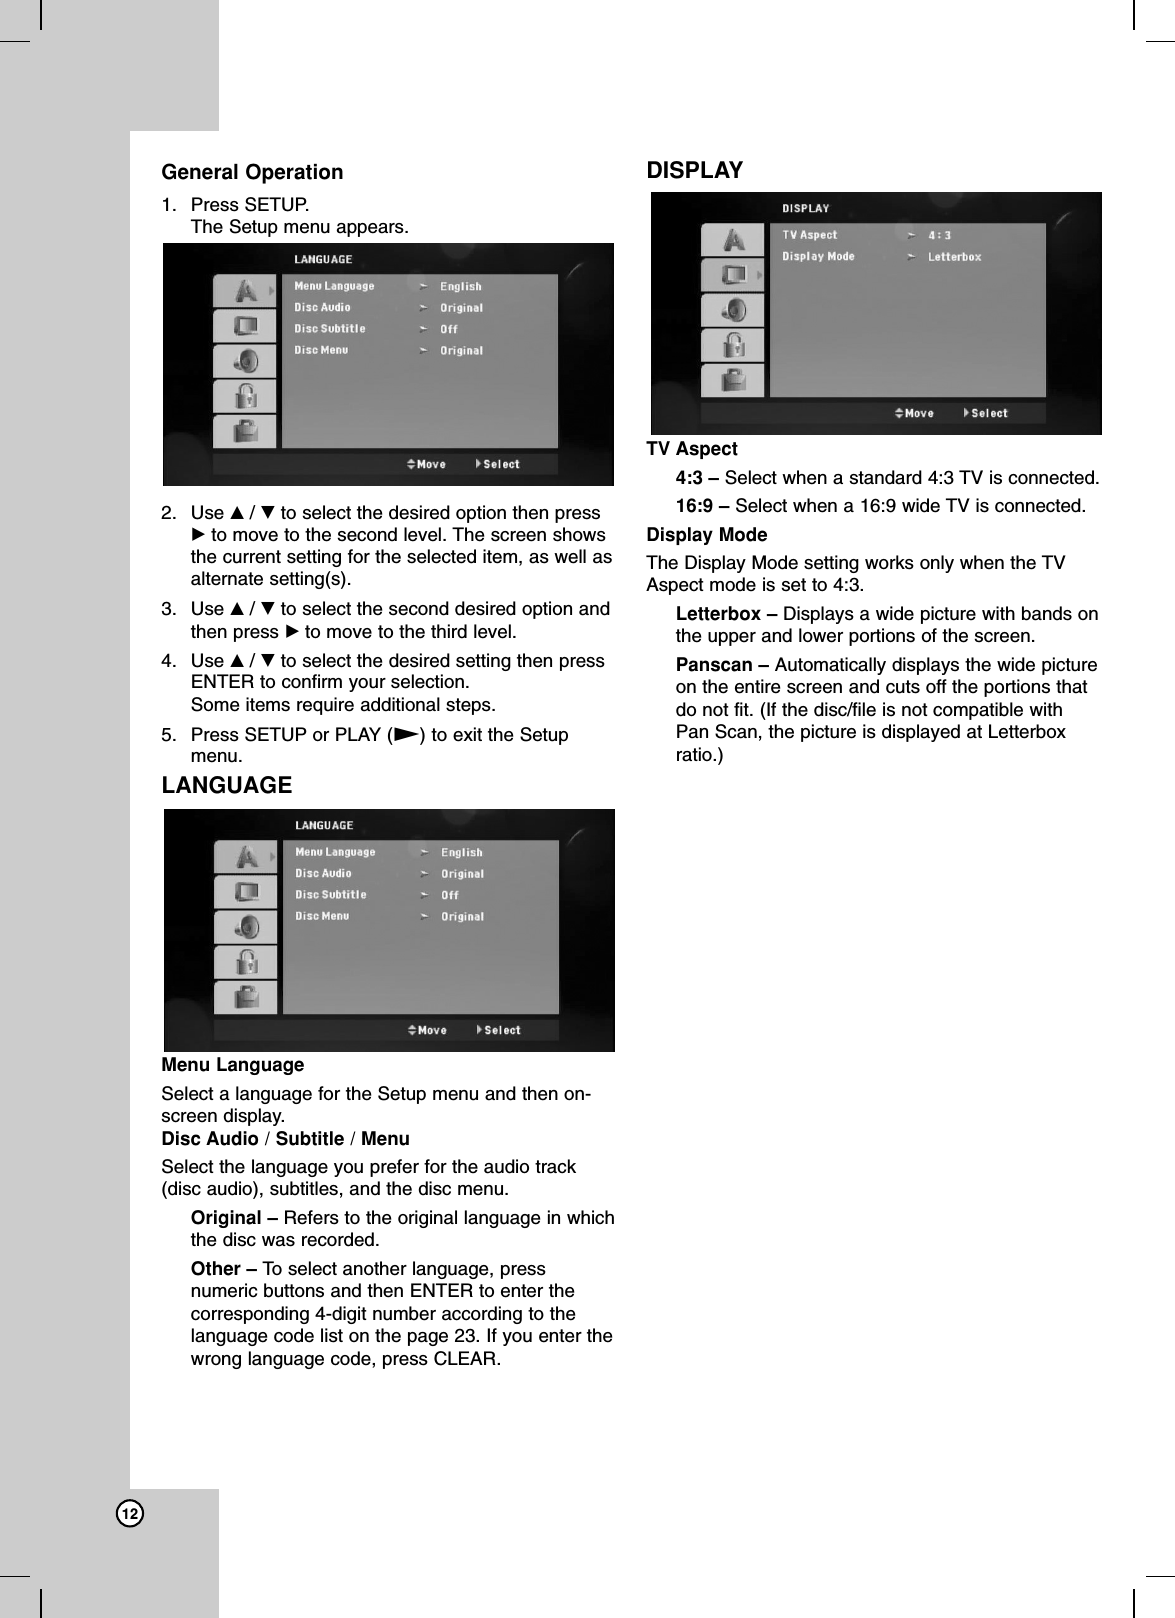 12General Operation1. Press SETUP. The Setup menu appears.2. Use v/Vto select the desired option then pressBto move to the second level. The screen showsthe current setting for the selected item, as well asalternate setting(s).3. Use v/Vto select the second desired option andthen press Bto move to the third level.4. Use v/Vto select the desired setting then pressENTER to confirm your selection. Some items require additional steps.5. Press SETUP or PLAY (N)to exit the Setupmenu.LANGUAGEMenu Language Select a language for the Setup menu and then on-screen display.Disc Audio / Subtitle / MenuSelect the language you prefer for the audio track(disc audio), subtitles, and the disc menu.Original – Refers to the original language in whichthe disc was recorded.Other – To  select another language, pressnumeric buttons and then ENTER to enter thecorresponding 4-digit number according to thelanguage code list on the page 23. If you enter thewrong language code, press CLEAR.DISPLAYTV Aspect 4:3 – Select when a standard 4:3 TV is connected.16:9 – Select when a 16:9 wide TV is connected.Display ModeThe Display Mode setting works only when the TVAspect mode is set to 4:3.Letterbox – Displays a wide picture with bands onthe upper and lower portions of the screen.Panscan – Automatically displays the wide pictureon the entire screen and cuts off the portions thatdo not fit. (If the disc/file is not compatible withPan Scan, the picture is displayed at Letterboxratio.)